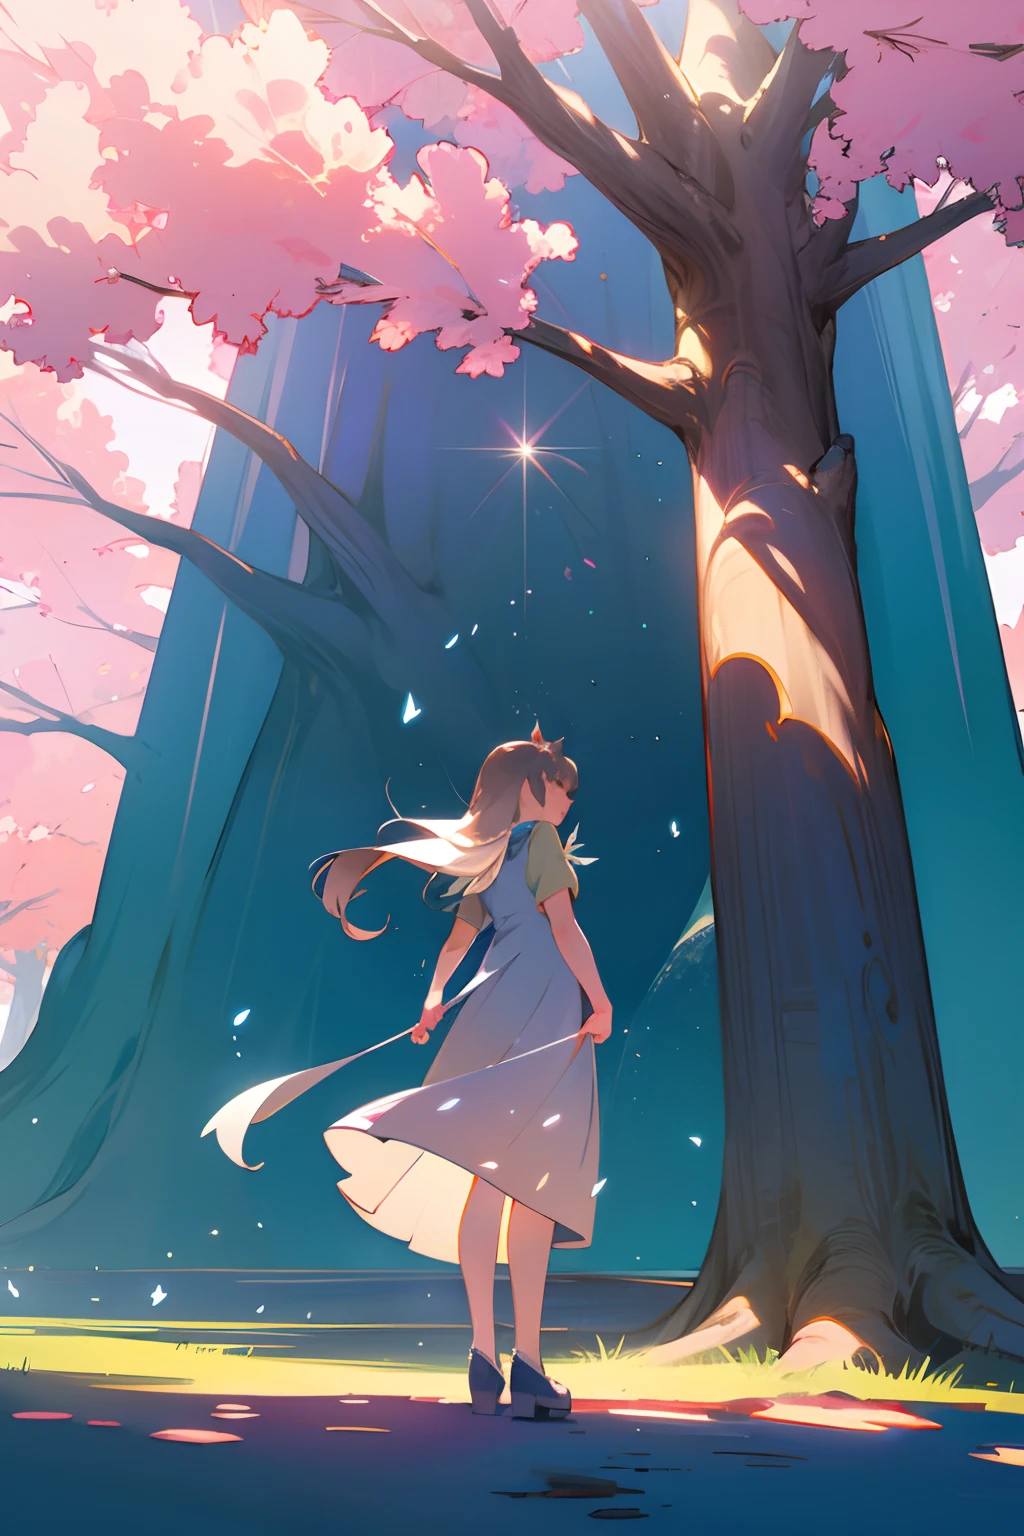 one-girl，standing under a tree，Look up at the big tree，Back Shadow，Wearing a long skirt，flowy，dream magical，